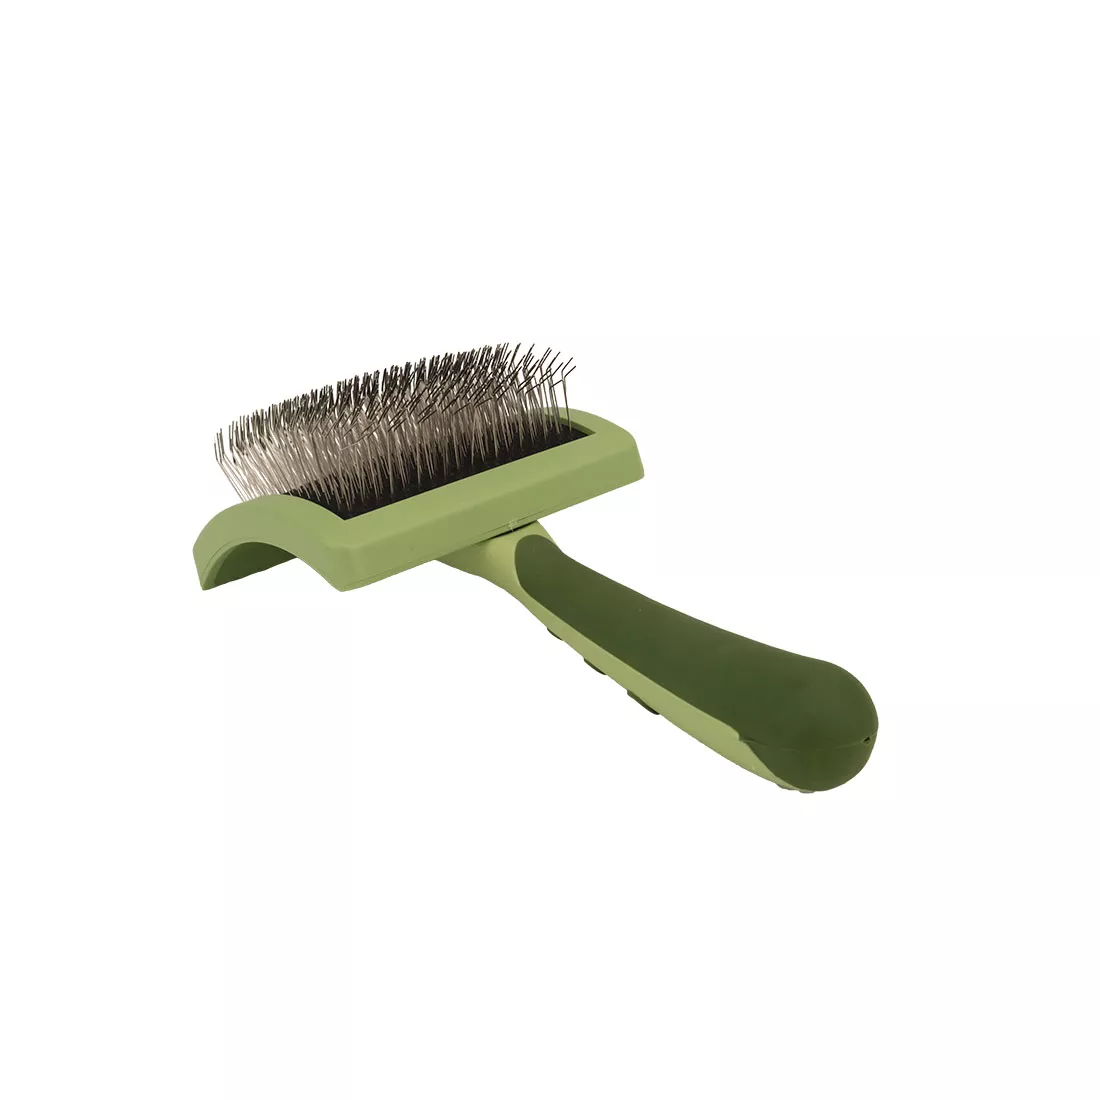 Safari® Curved Firm Slicker Brush with Coated Tips for Long Hair